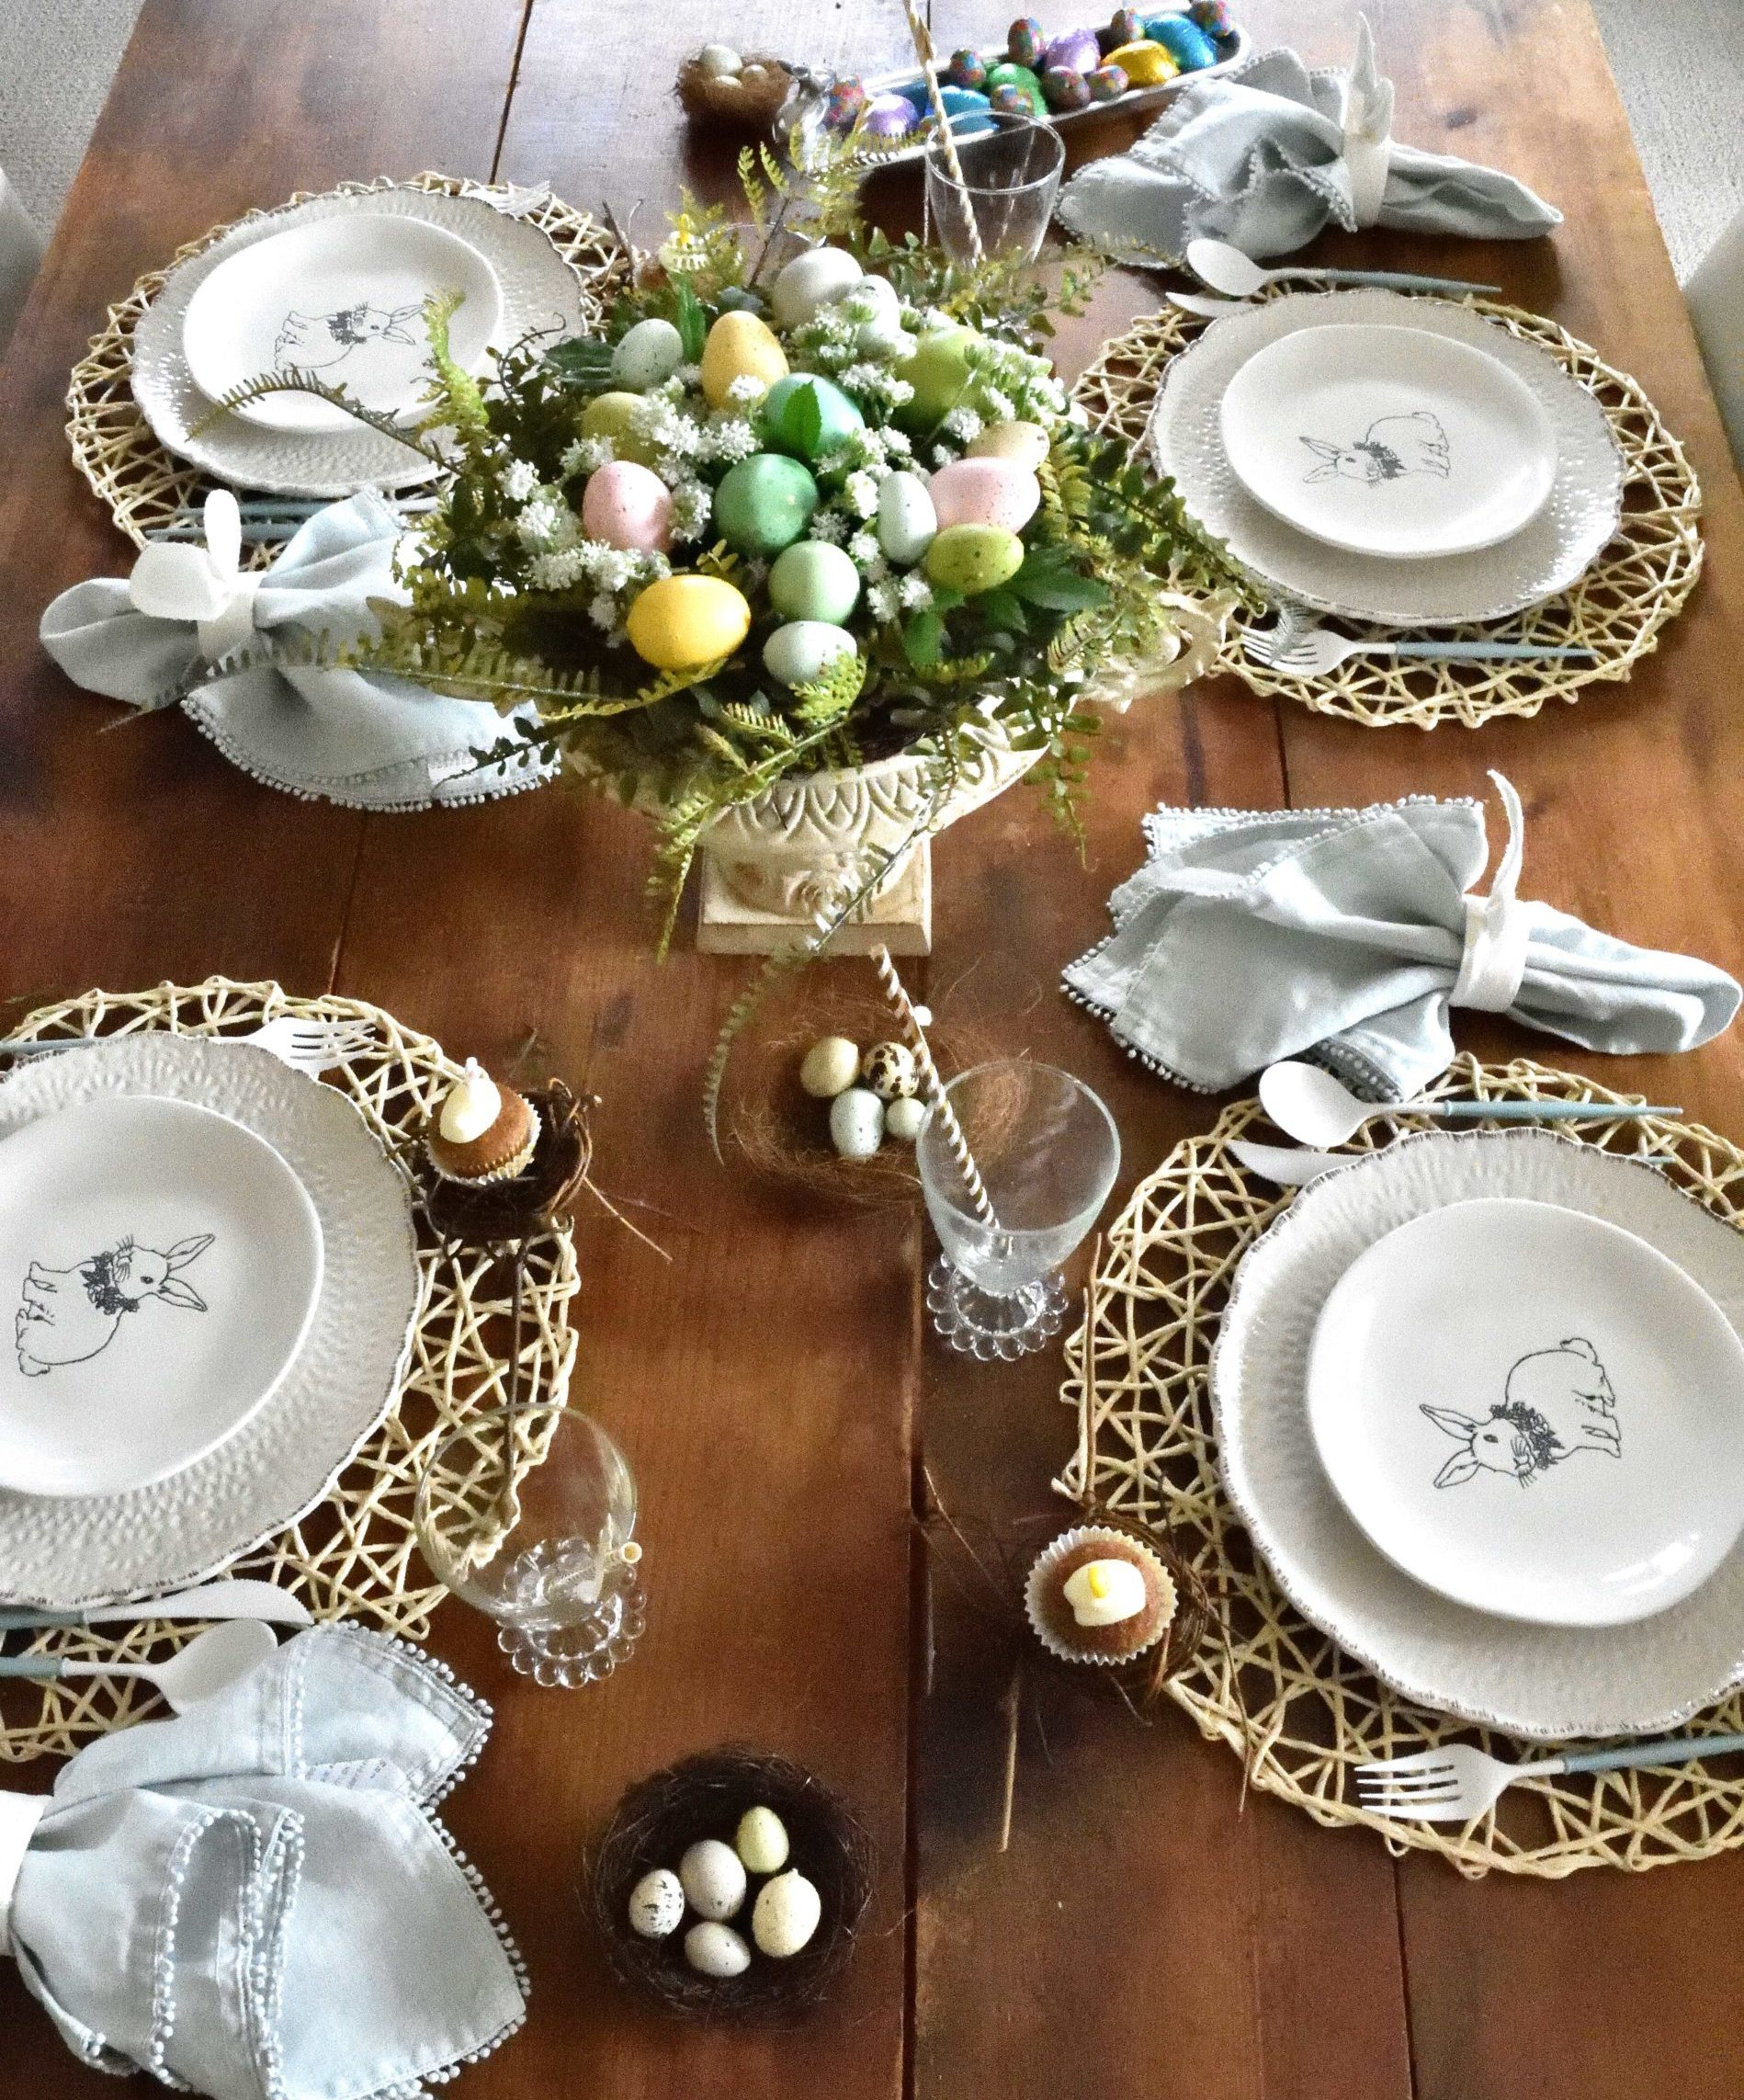 A simple Easter table